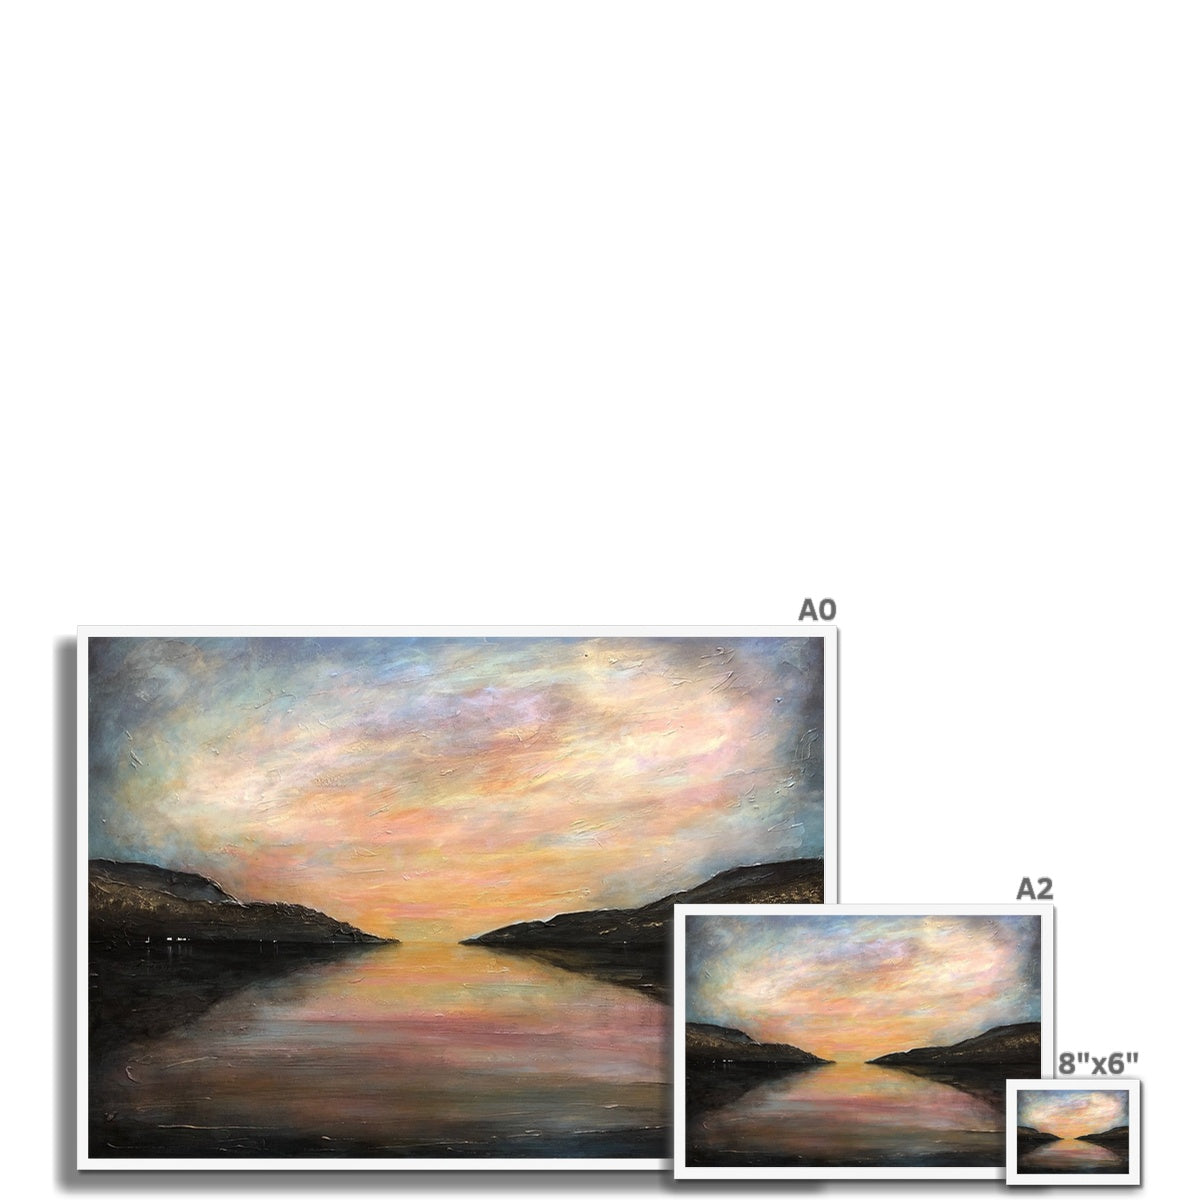 Loch Ness Glow Painting | Framed Prints From Scotland-Framed Prints-Scottish Lochs & Mountains Art Gallery-Paintings, Prints, Homeware, Art Gifts From Scotland By Scottish Artist Kevin Hunter